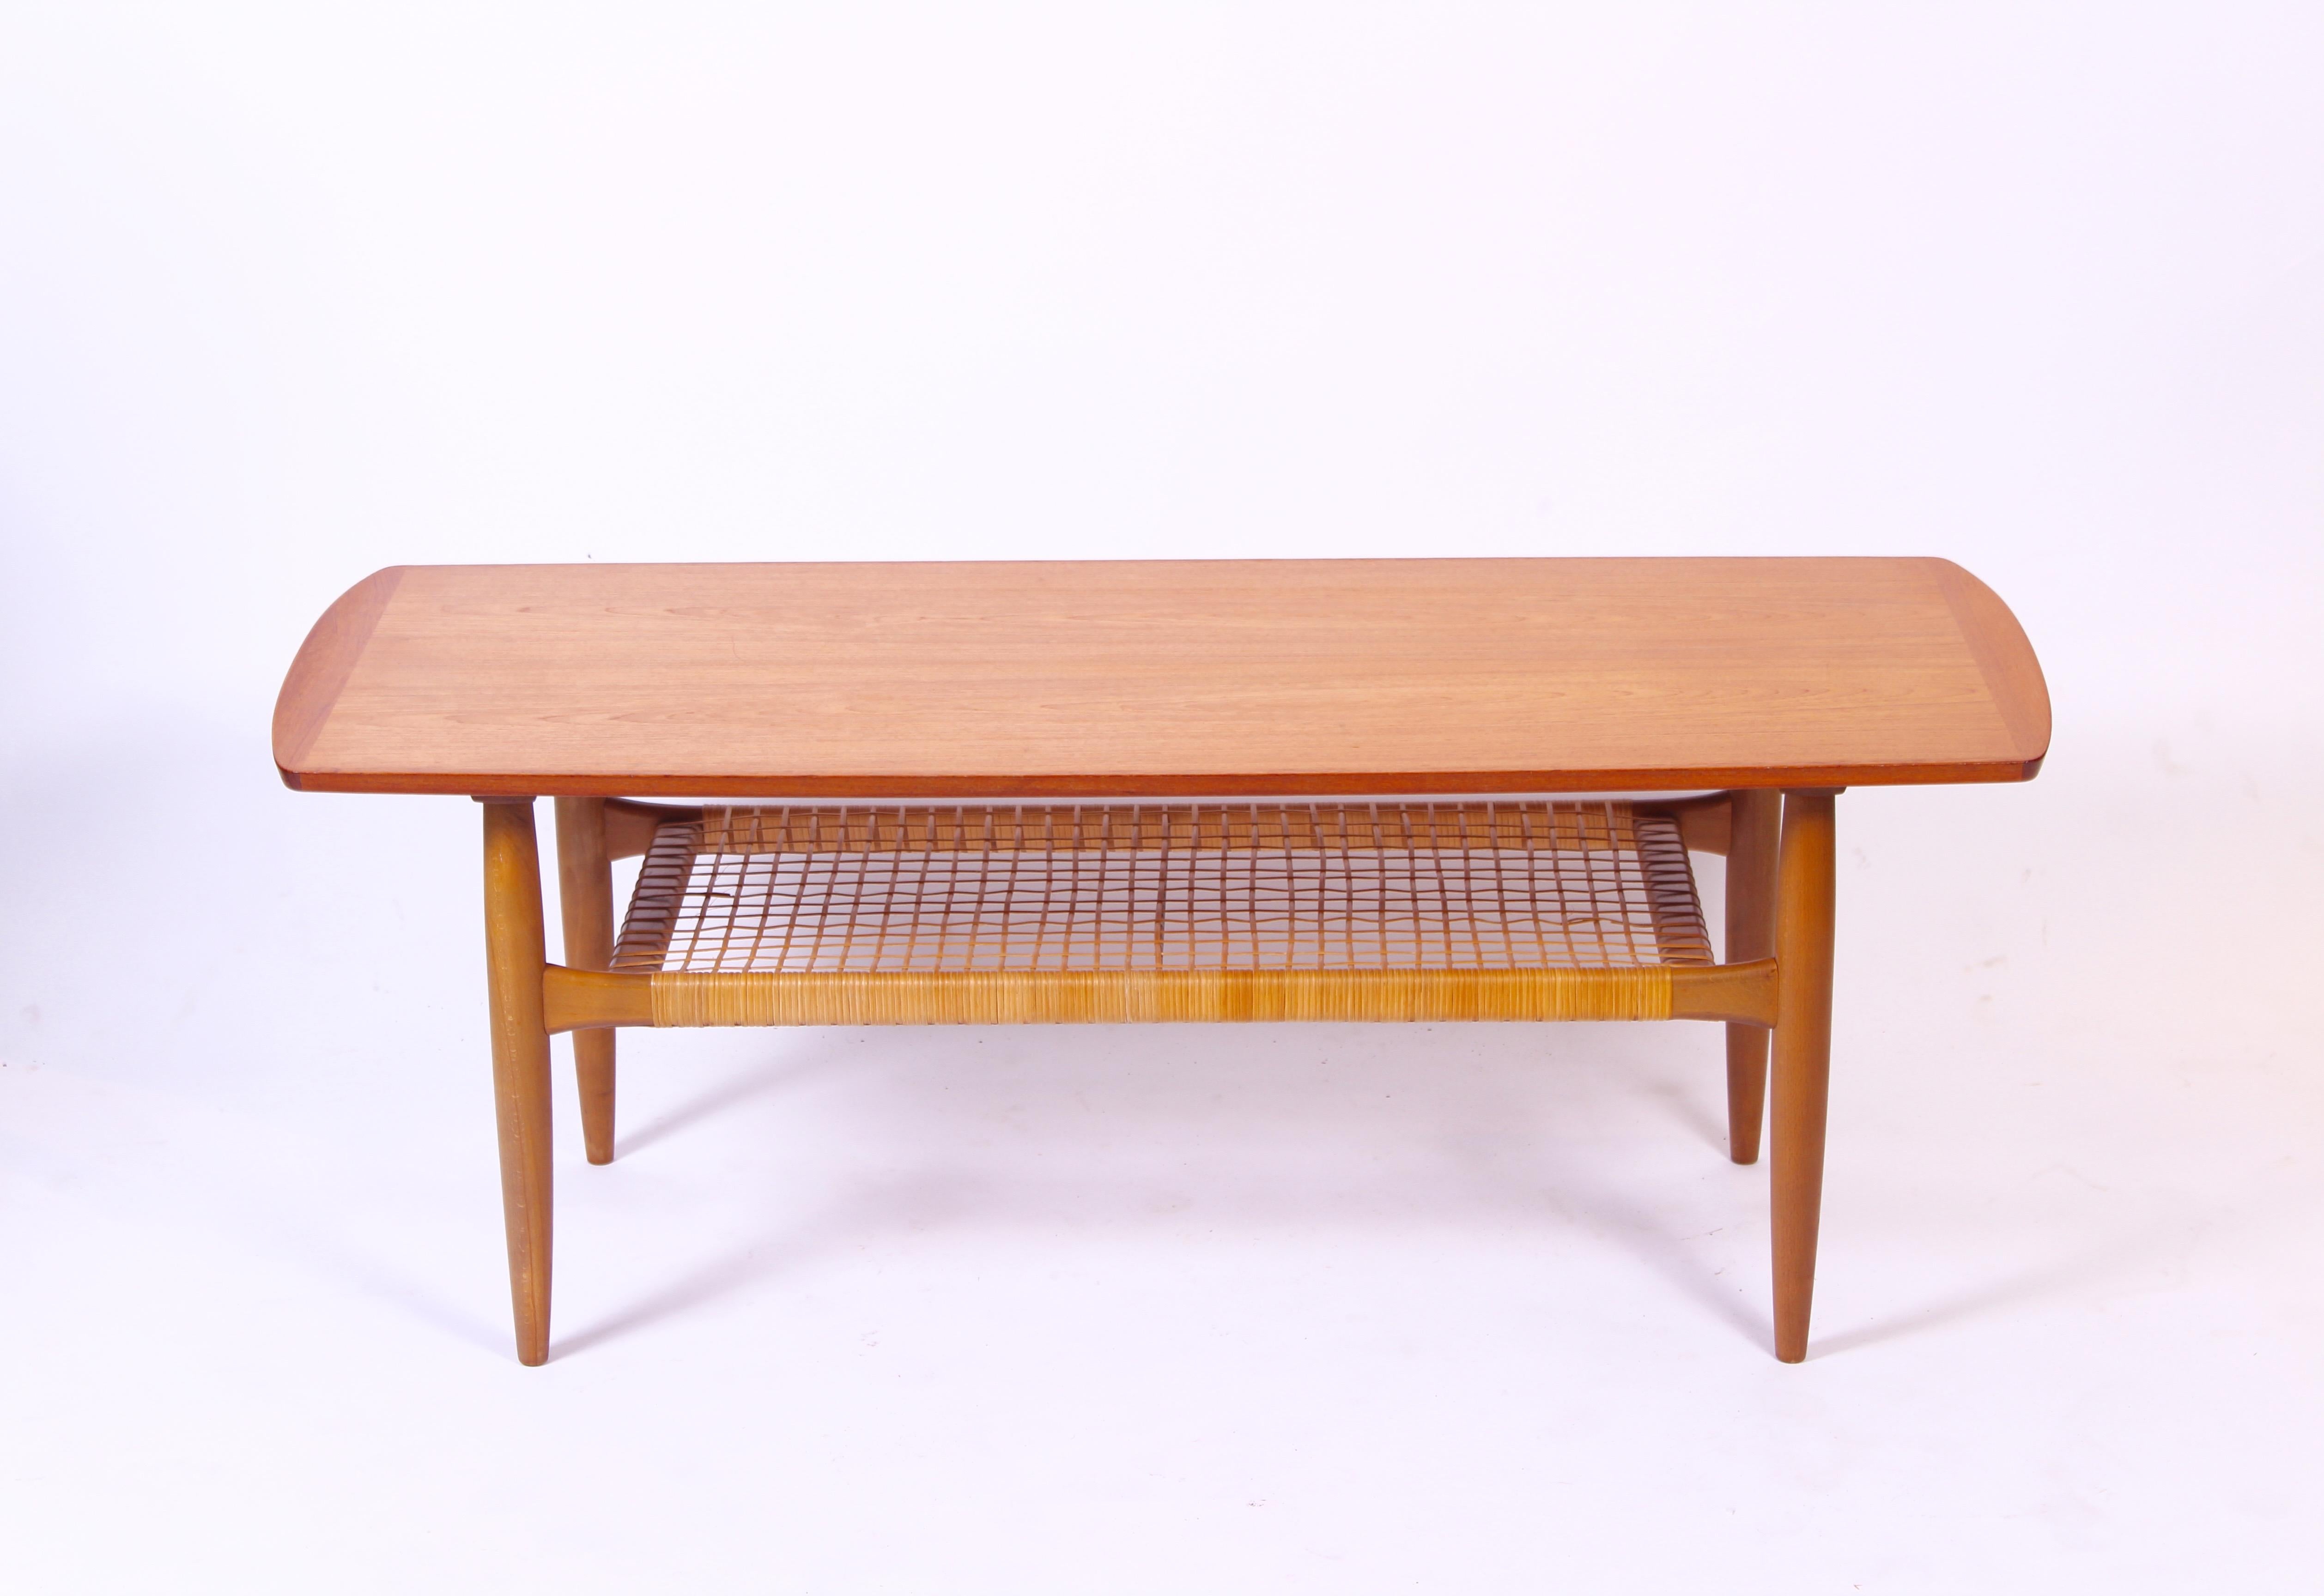 A beautifully designed coffee table from the mid-20th century by Danish designer Kurt Østervig. The table was produced by Danish furniture manufacturer Jason Møbler in the 1950s. Excellent details such as the rattan shelf, tapered legs and elevated